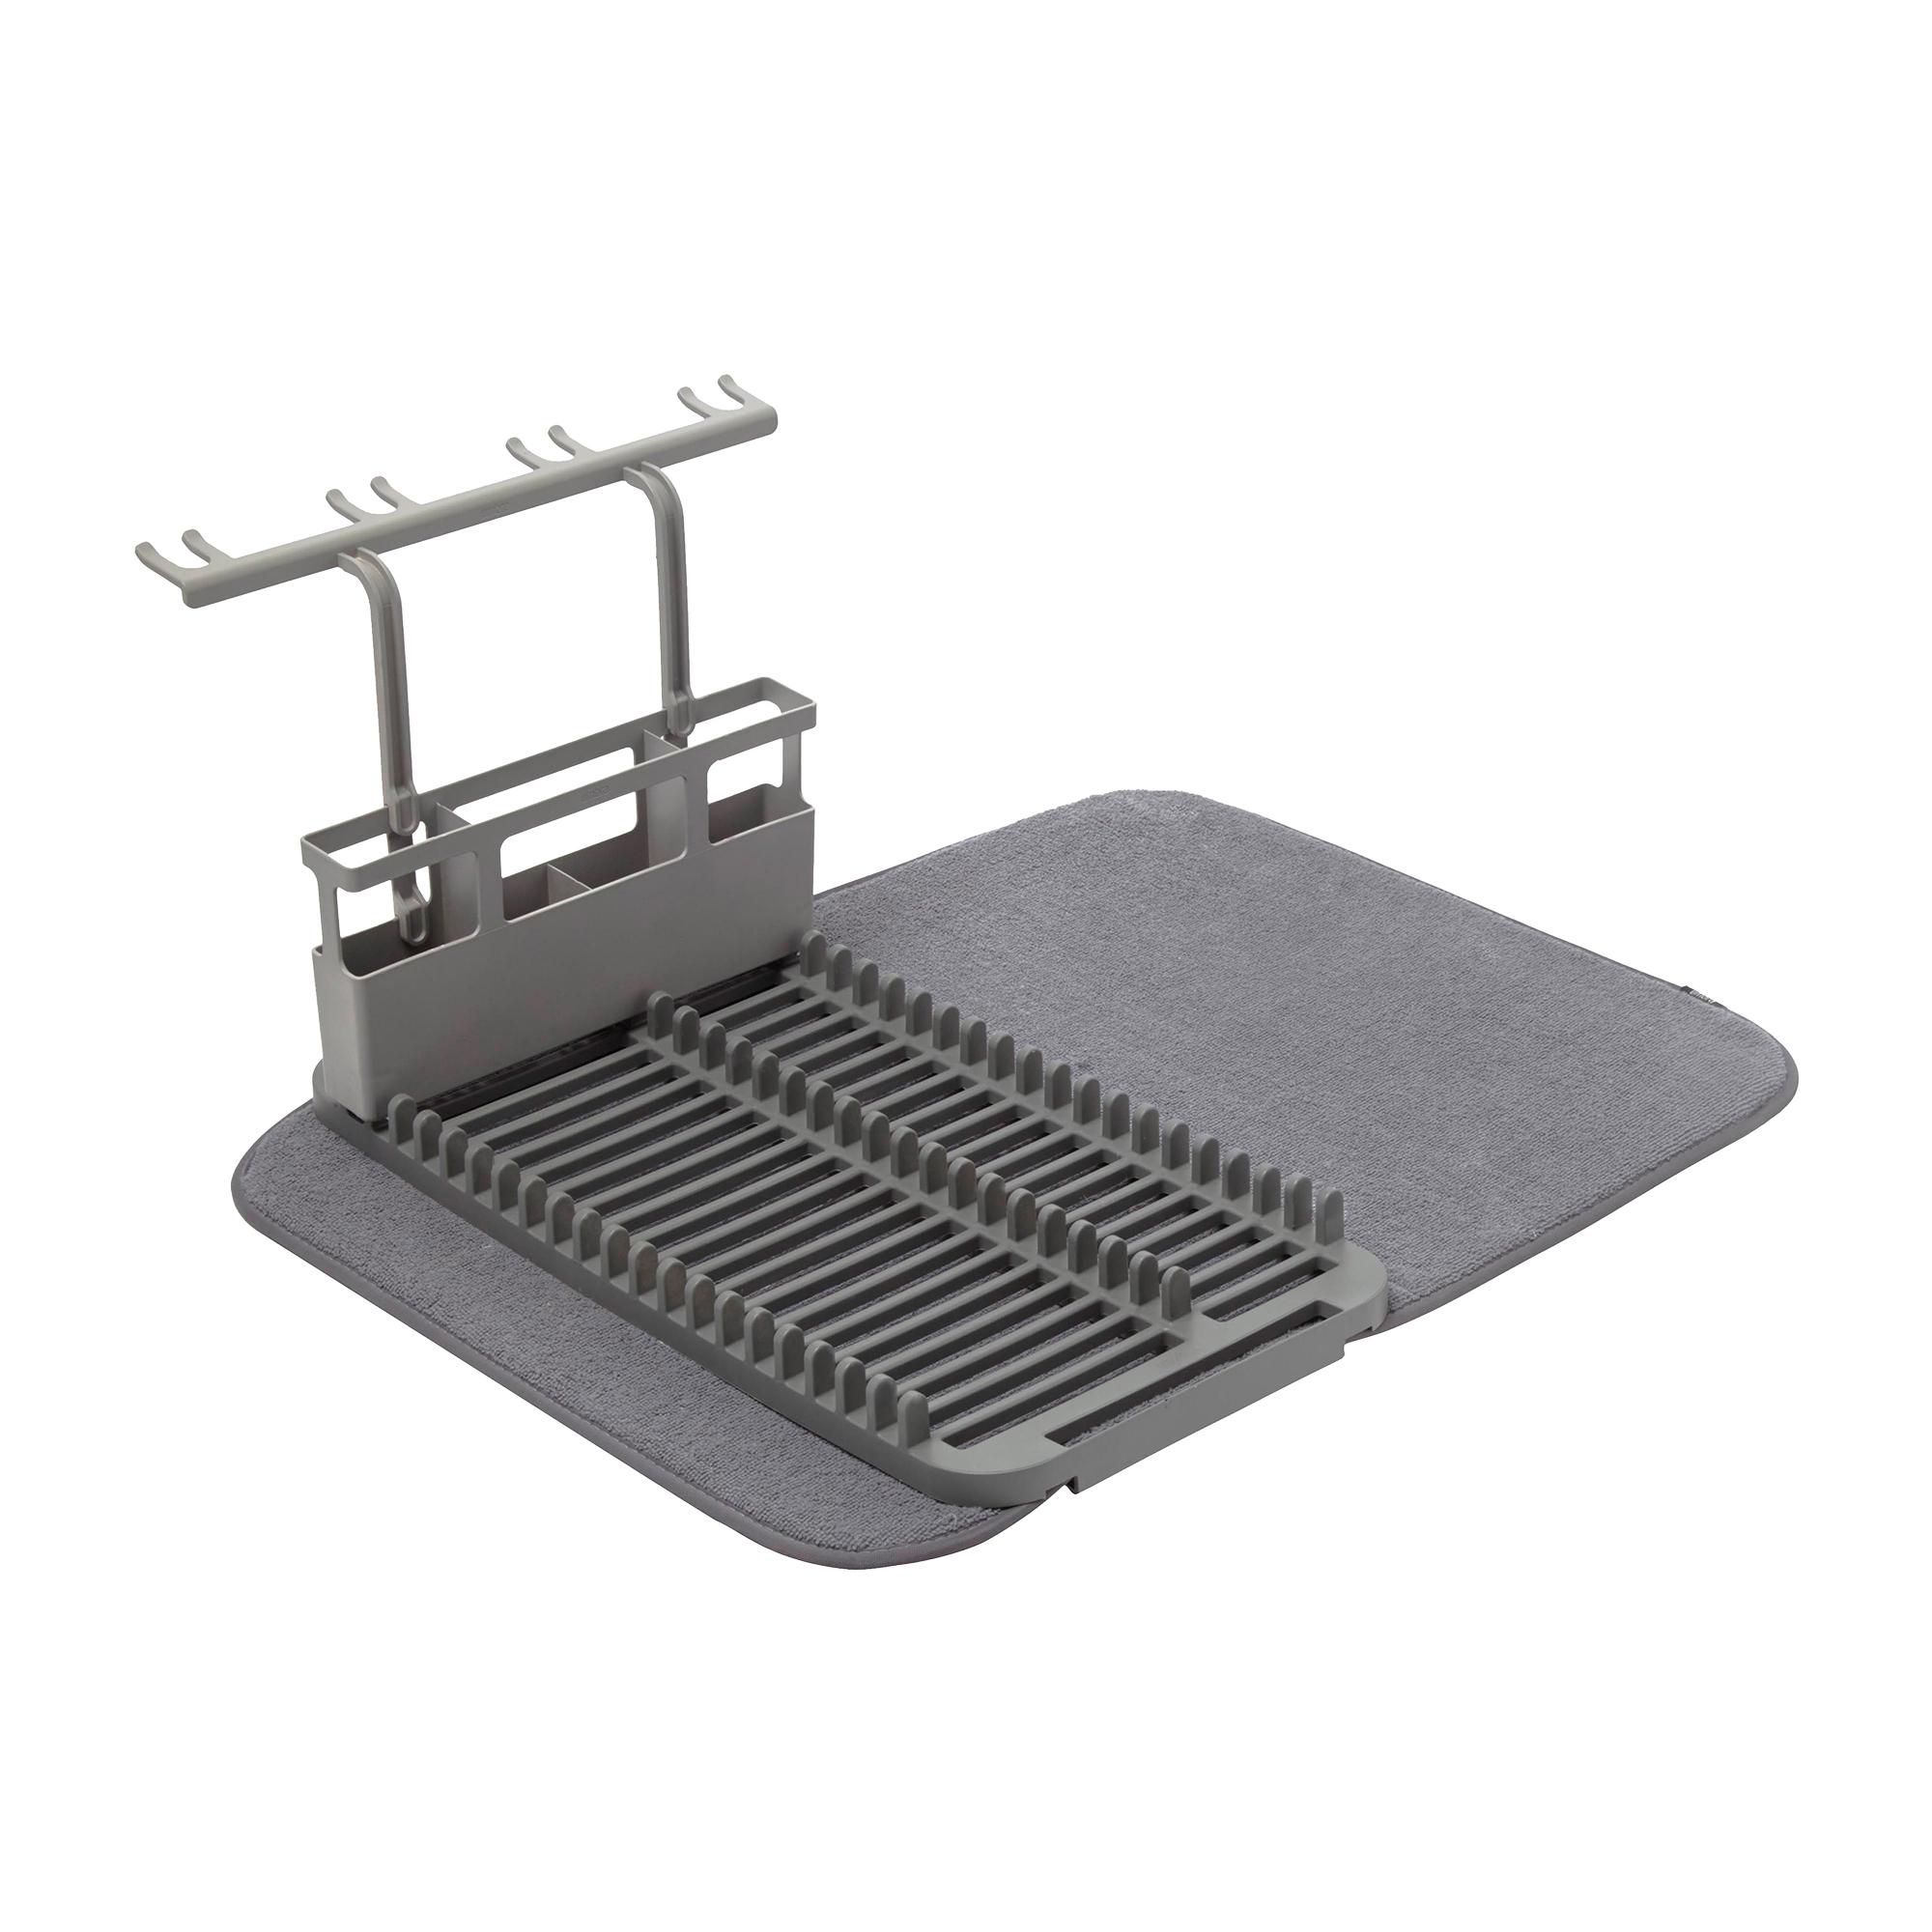 Umbra UDry Dish Rack with Drying Mat Charcoal Image 1